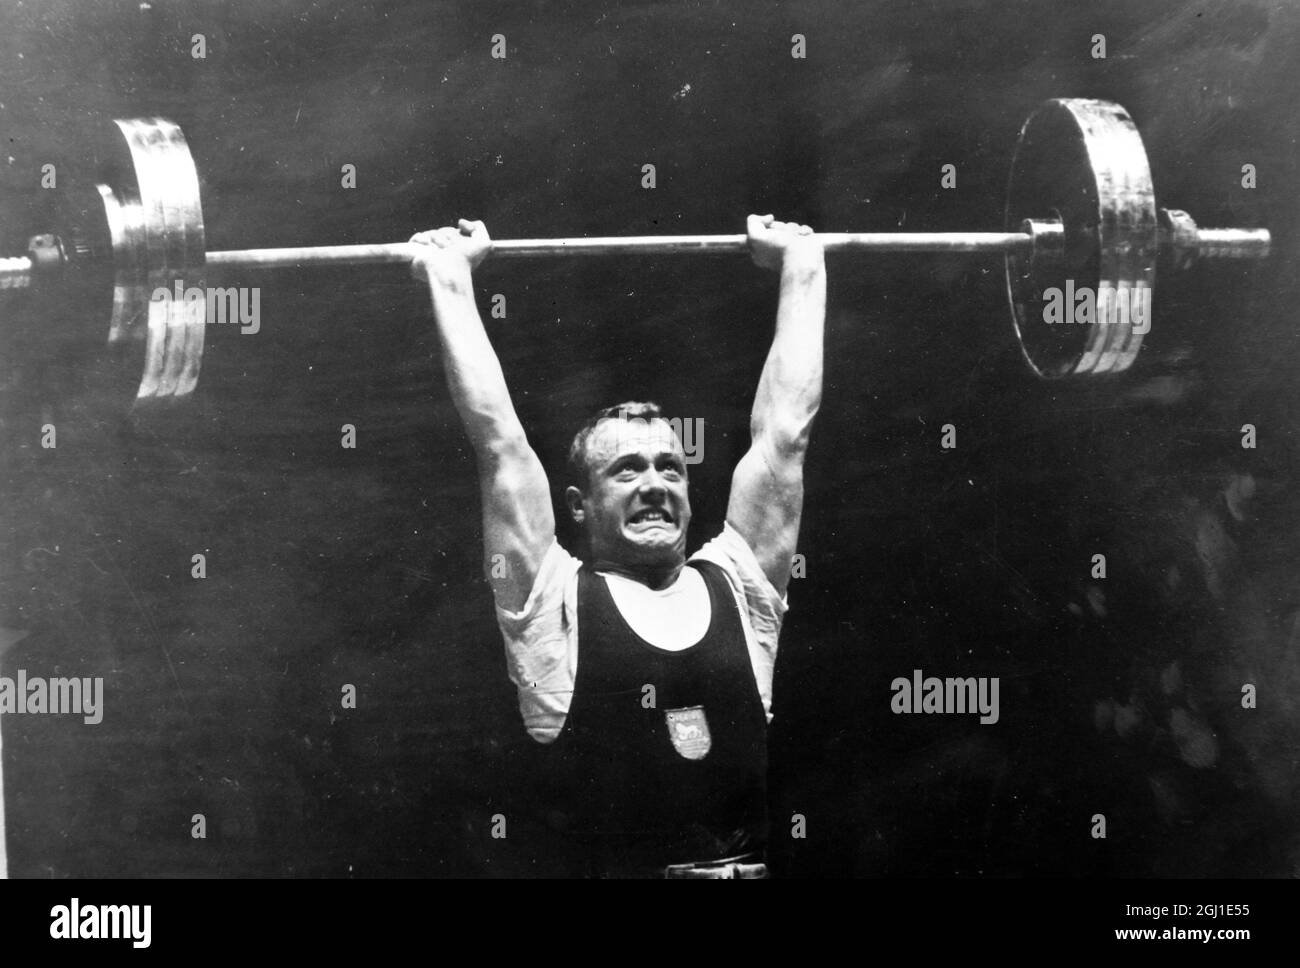 OLYMPICS, OLYMPIC SPORT GAMES - THE XVIII 18TH OLYMPIAD IN TOKYO, JAPAN - WEIGHTLIFTING OLYMPICS ASP MIDDLE HEAVYWEIGHT ; 20 OCTOBER 1964 Stock Photo